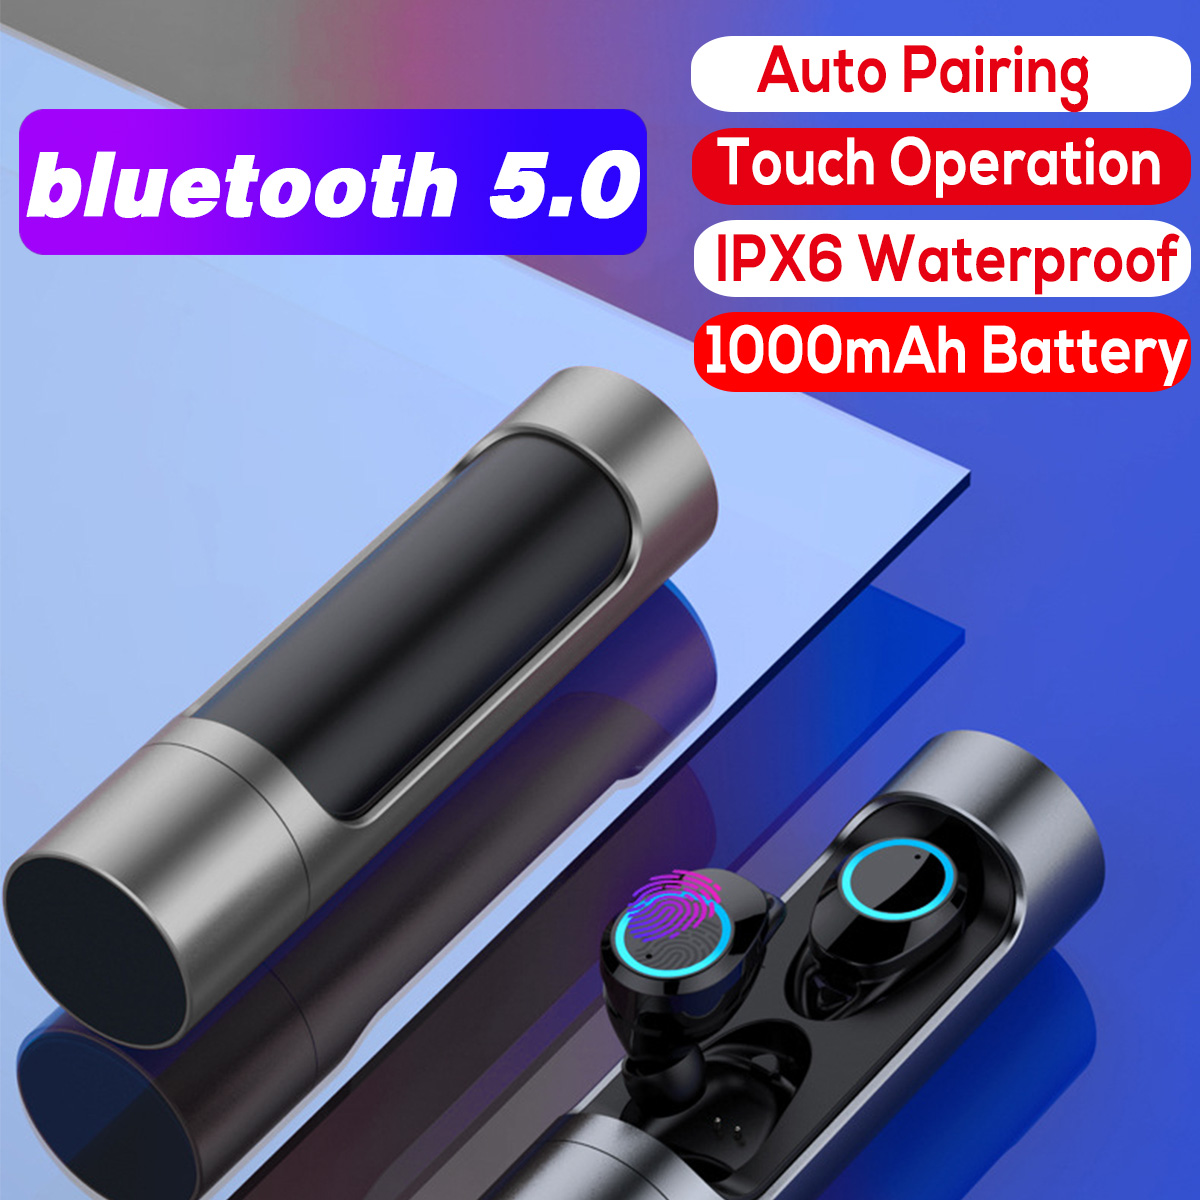 bluetooth-50-Mini-TWS-Earbuds-Smart-Touch-Bilateral-Call-IPX6-Waterproof-Earphone-with-1000mAh-Charg-1439770-1